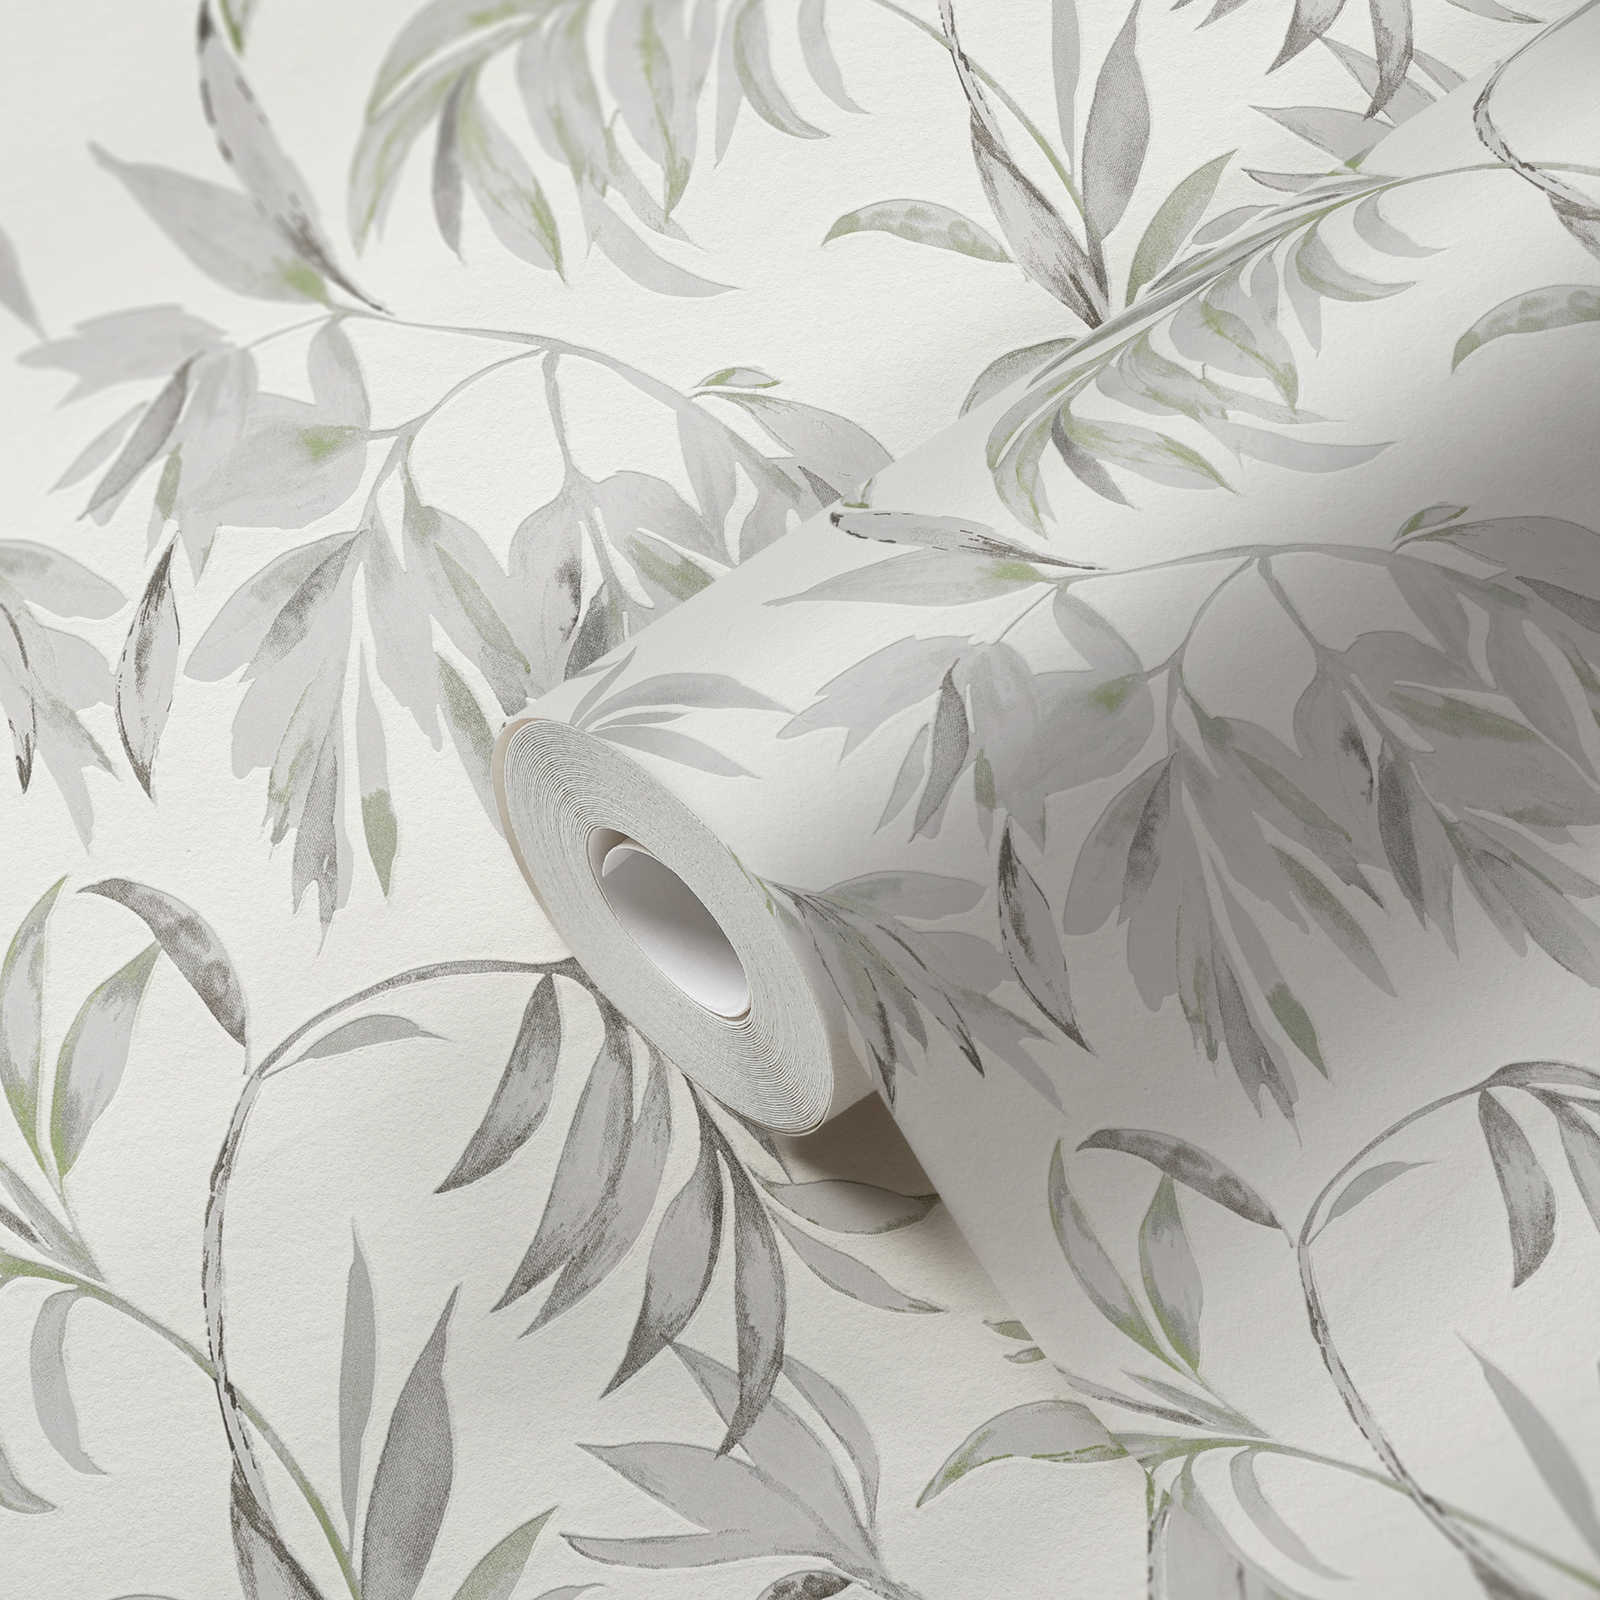             Nature wallpaper with leaves tendrils - beige, brown
        